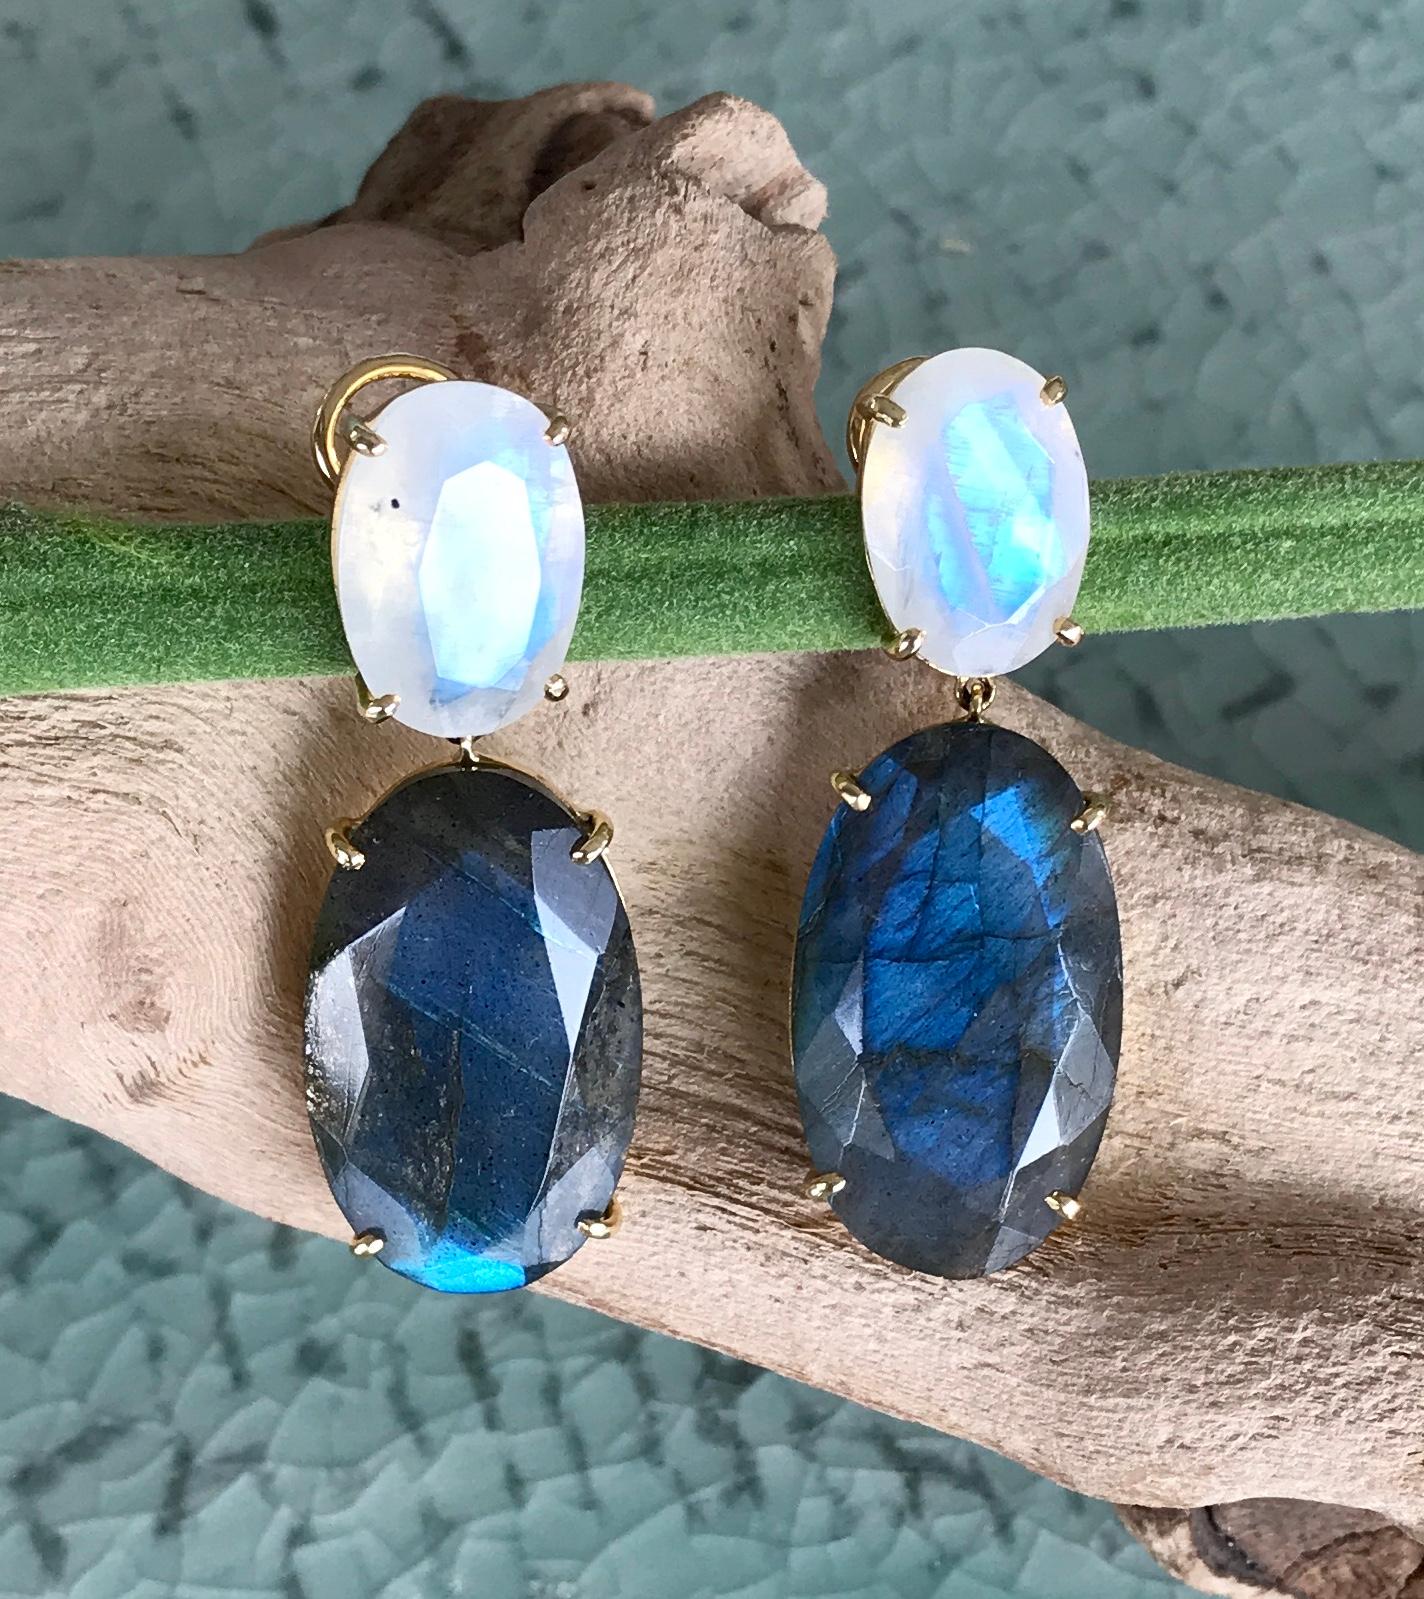 Joon Han one-of-a-kind Madagascar labradorite and rainbow moonstone drop dangle earrings are simple yet add beautiful colors with the magical changing hues of the gemstones. The intensely rich and deep bluish hues of these amazing top quality